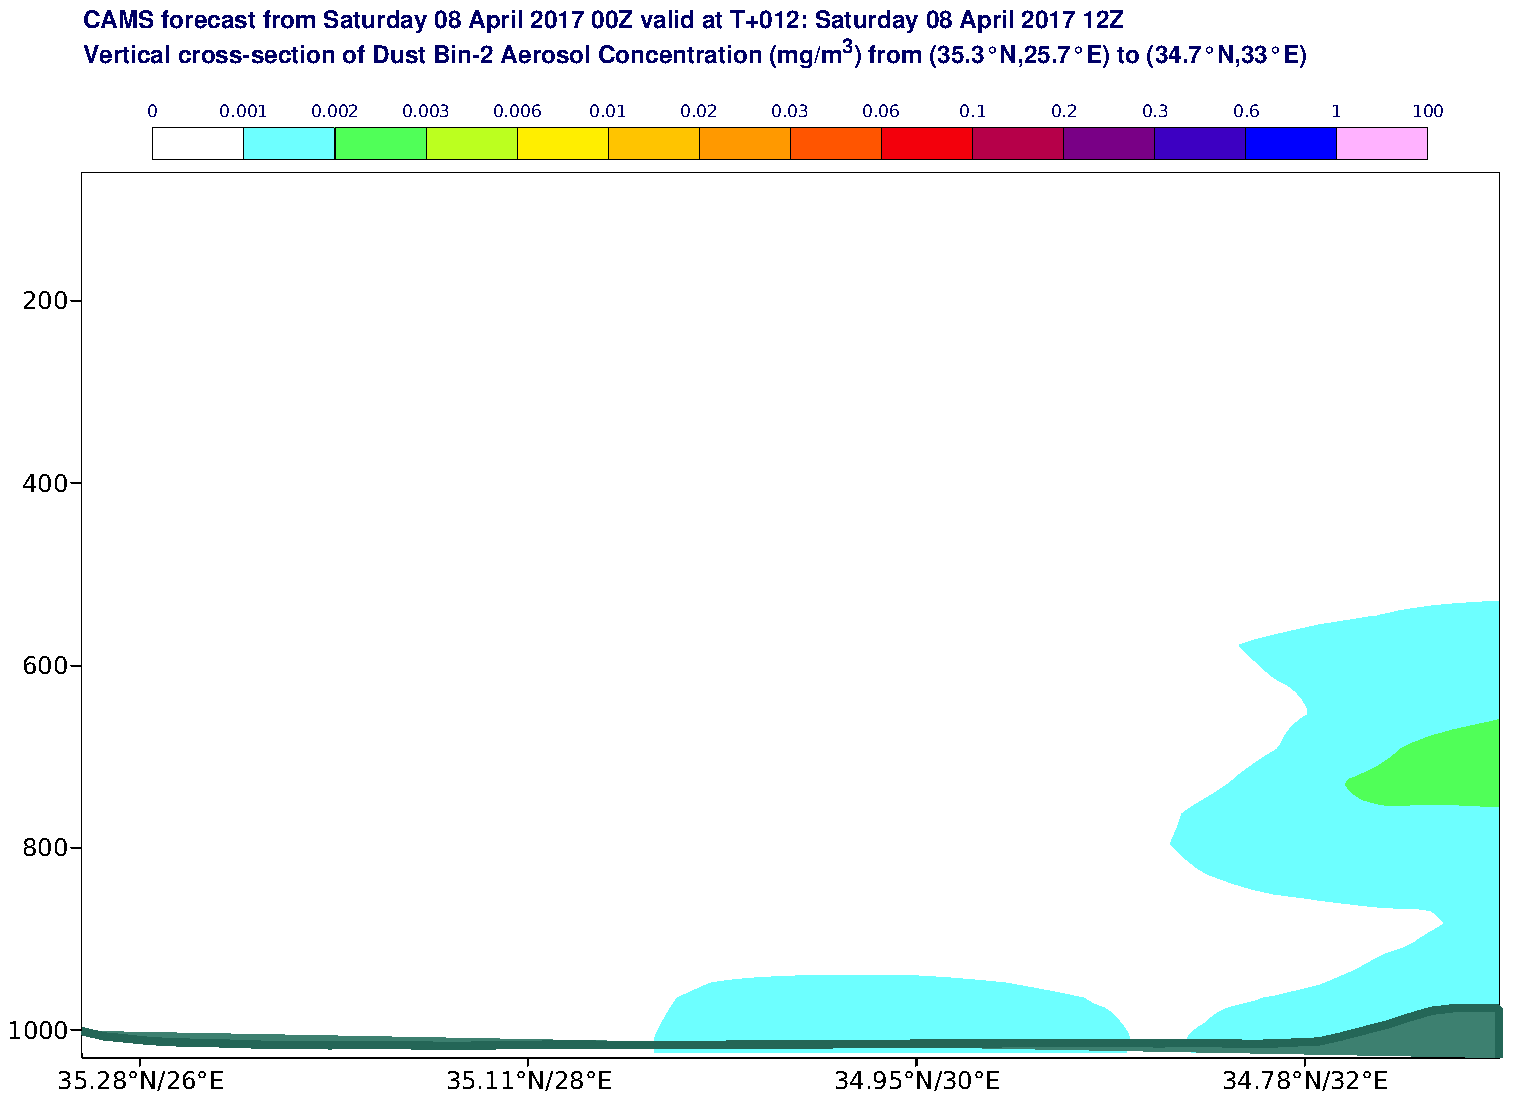 Vertical cross-section of Dust Bin-2 Aerosol Concentration (mg/m3) valid at T12 - 2017-04-08 12:00